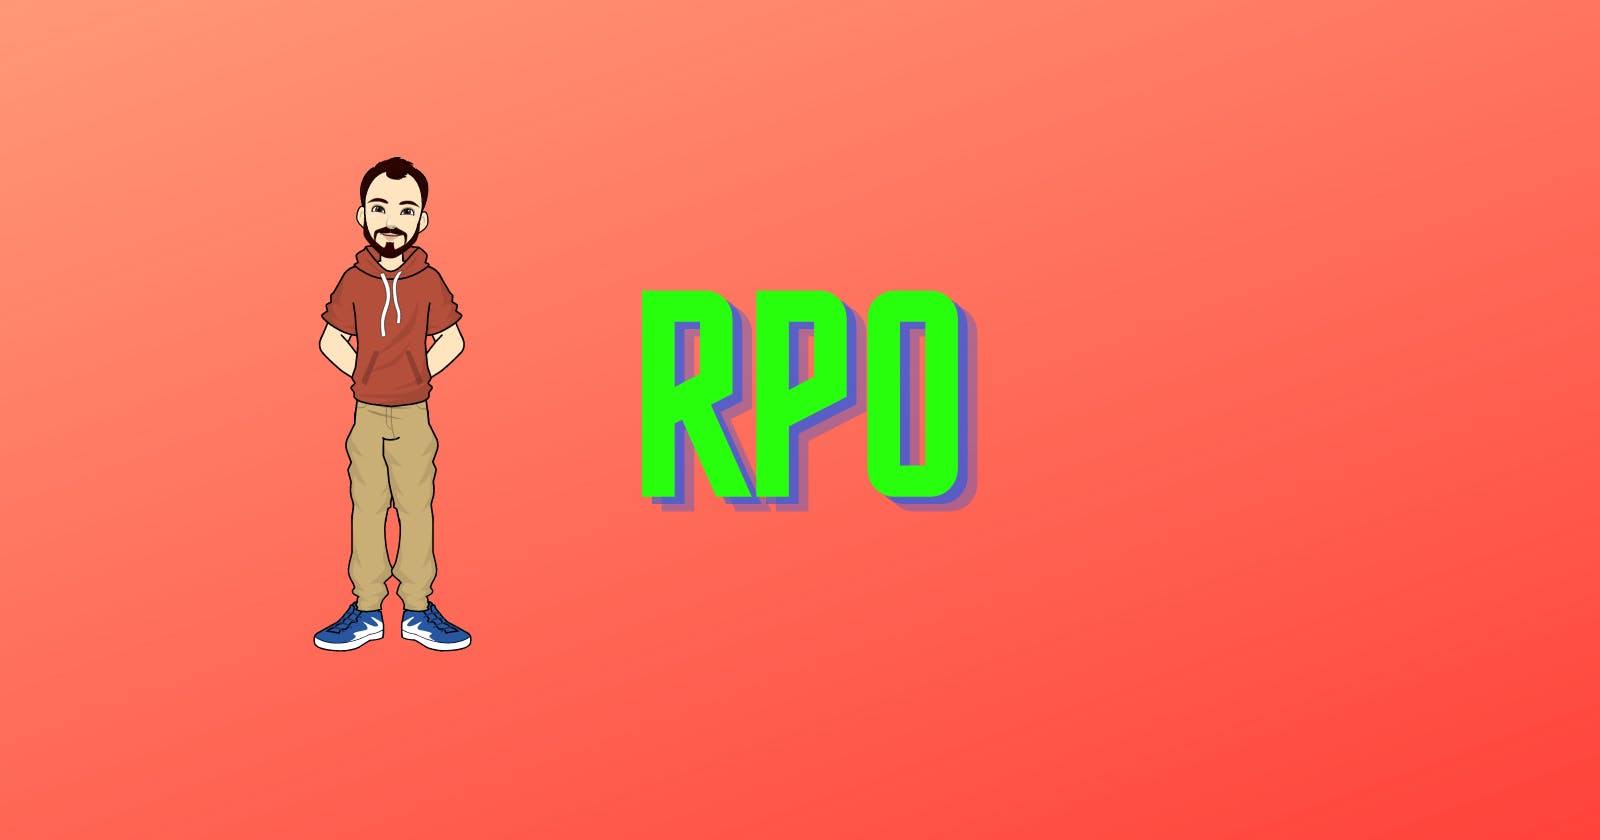 Know About RPO (Recovery
Point Objective)